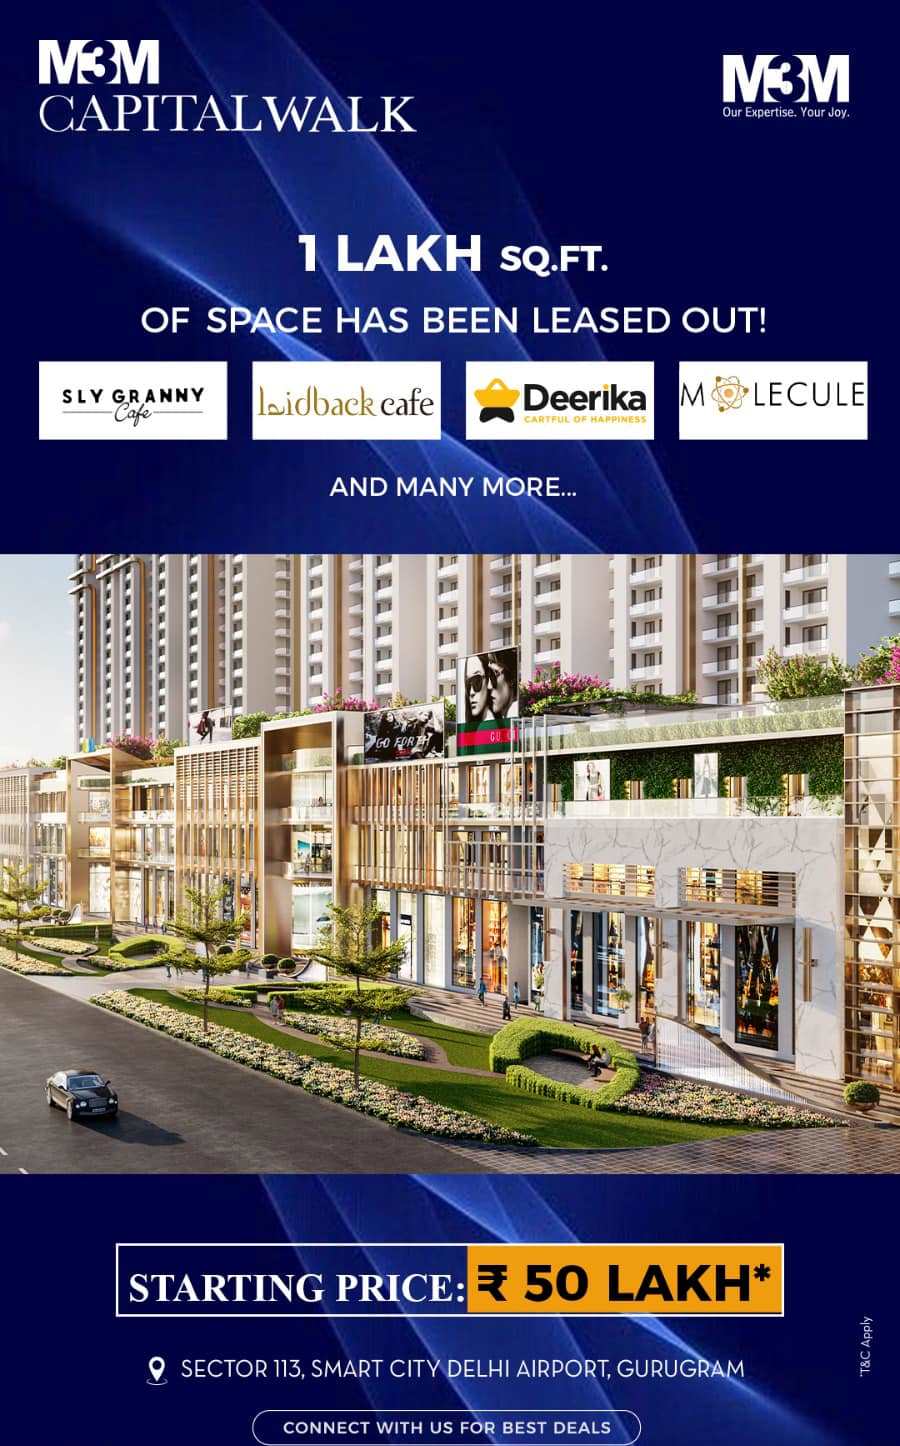 M3M Capitalwalk investment starting from Rs 50 Lac onwards. Update